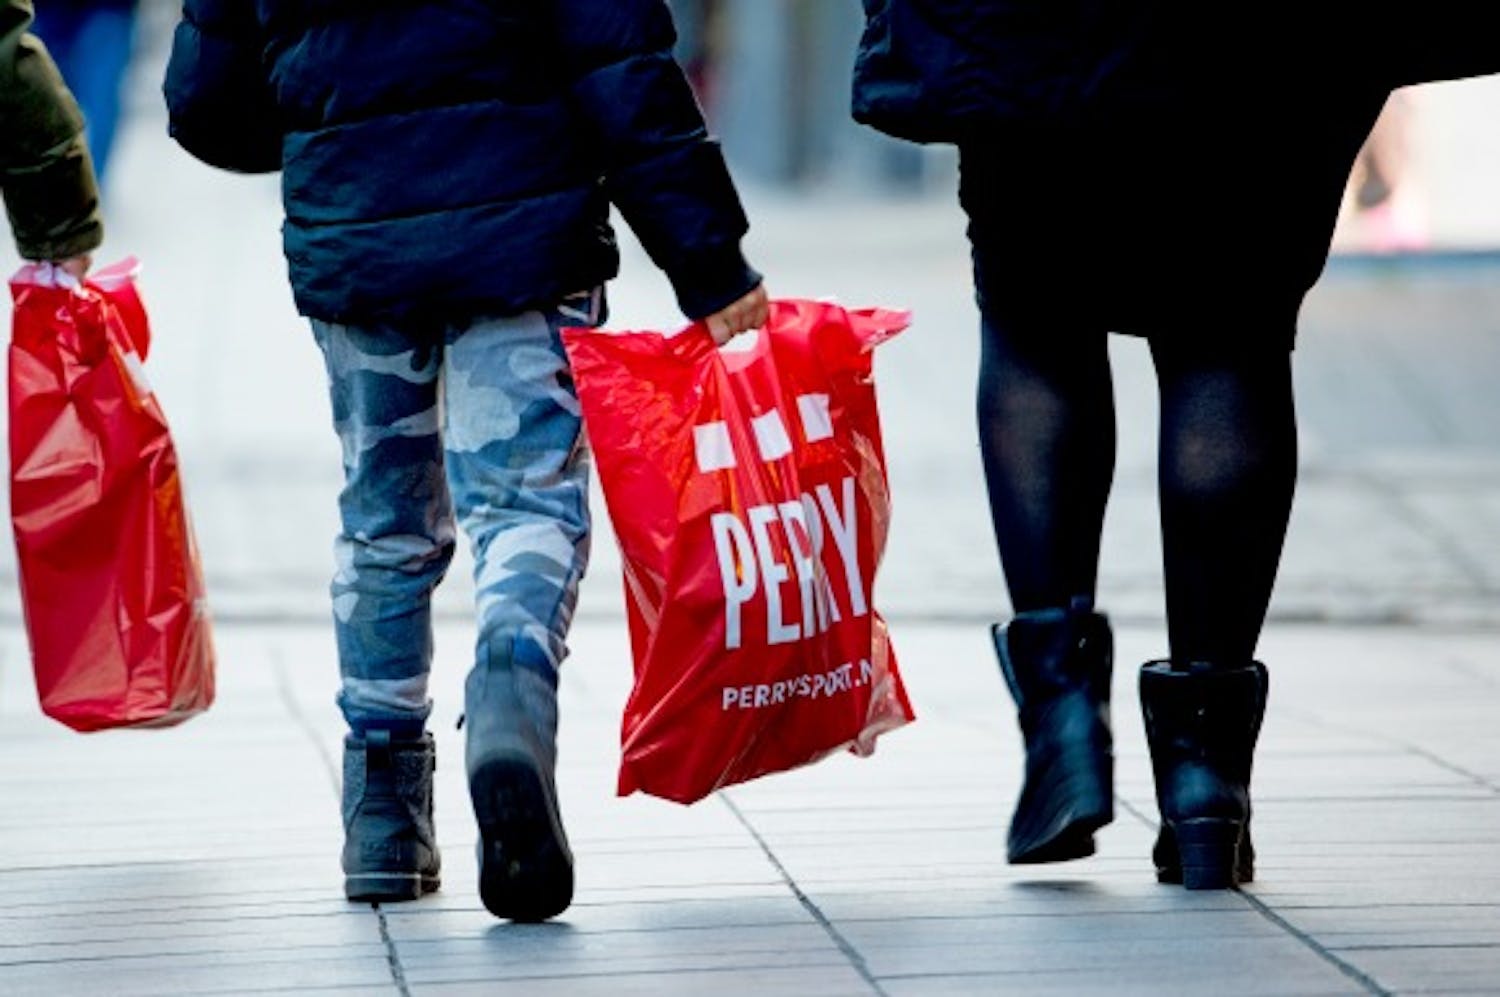 Britain’s JD Sports Fashion wants to take over Perry Sport and Aktiesport